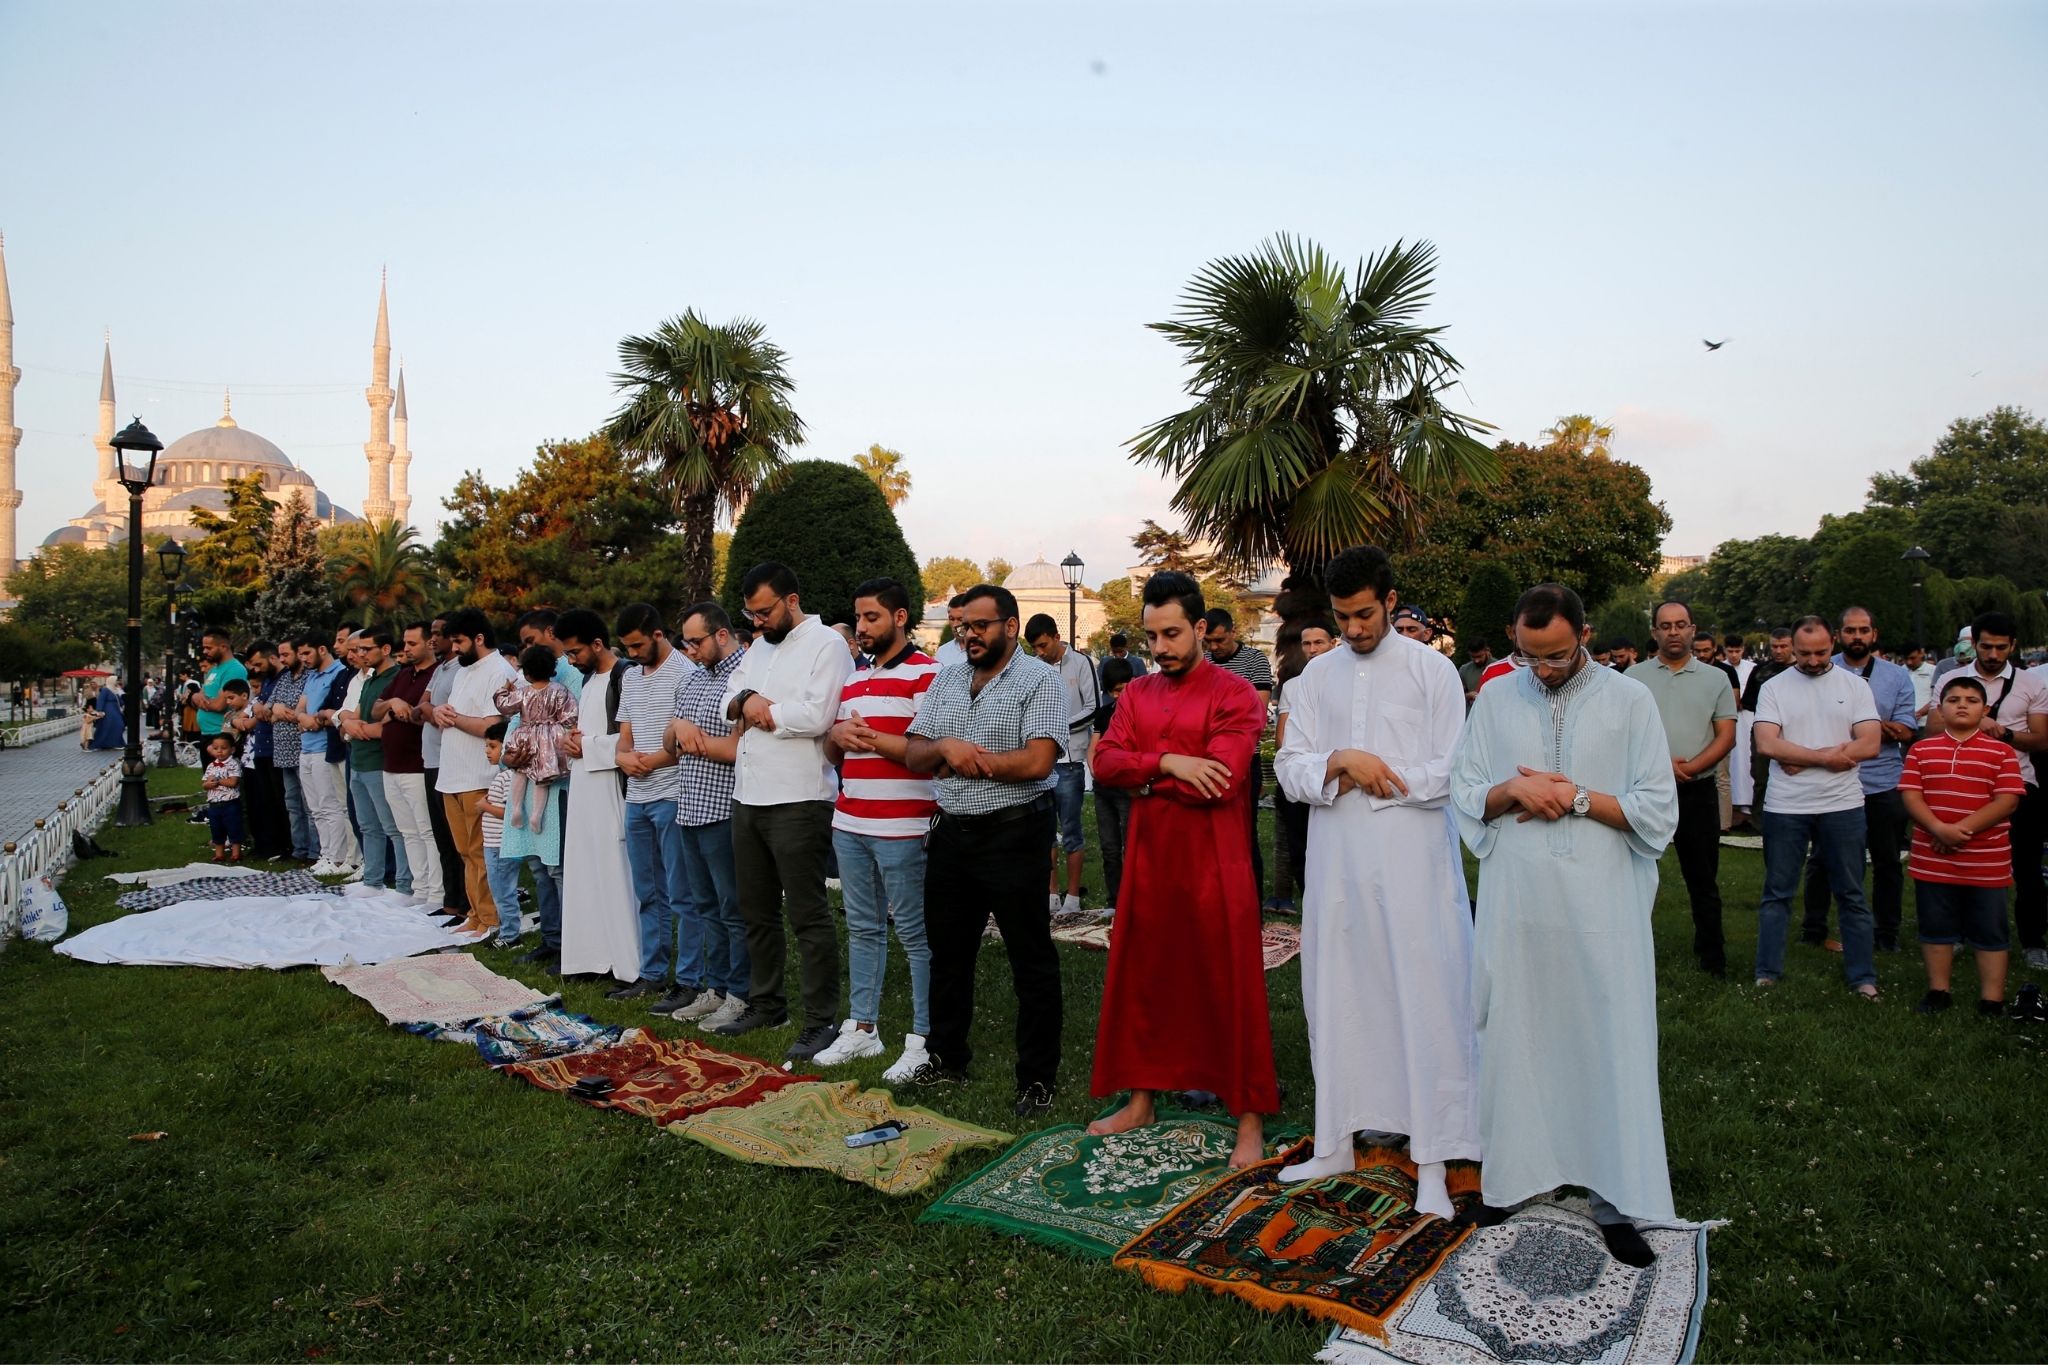 People pray on the first day of Muslim holiday of Eid al-Adha, at Sultanahmet Sqaure in Istanbul, Turkey July 9, 2022.